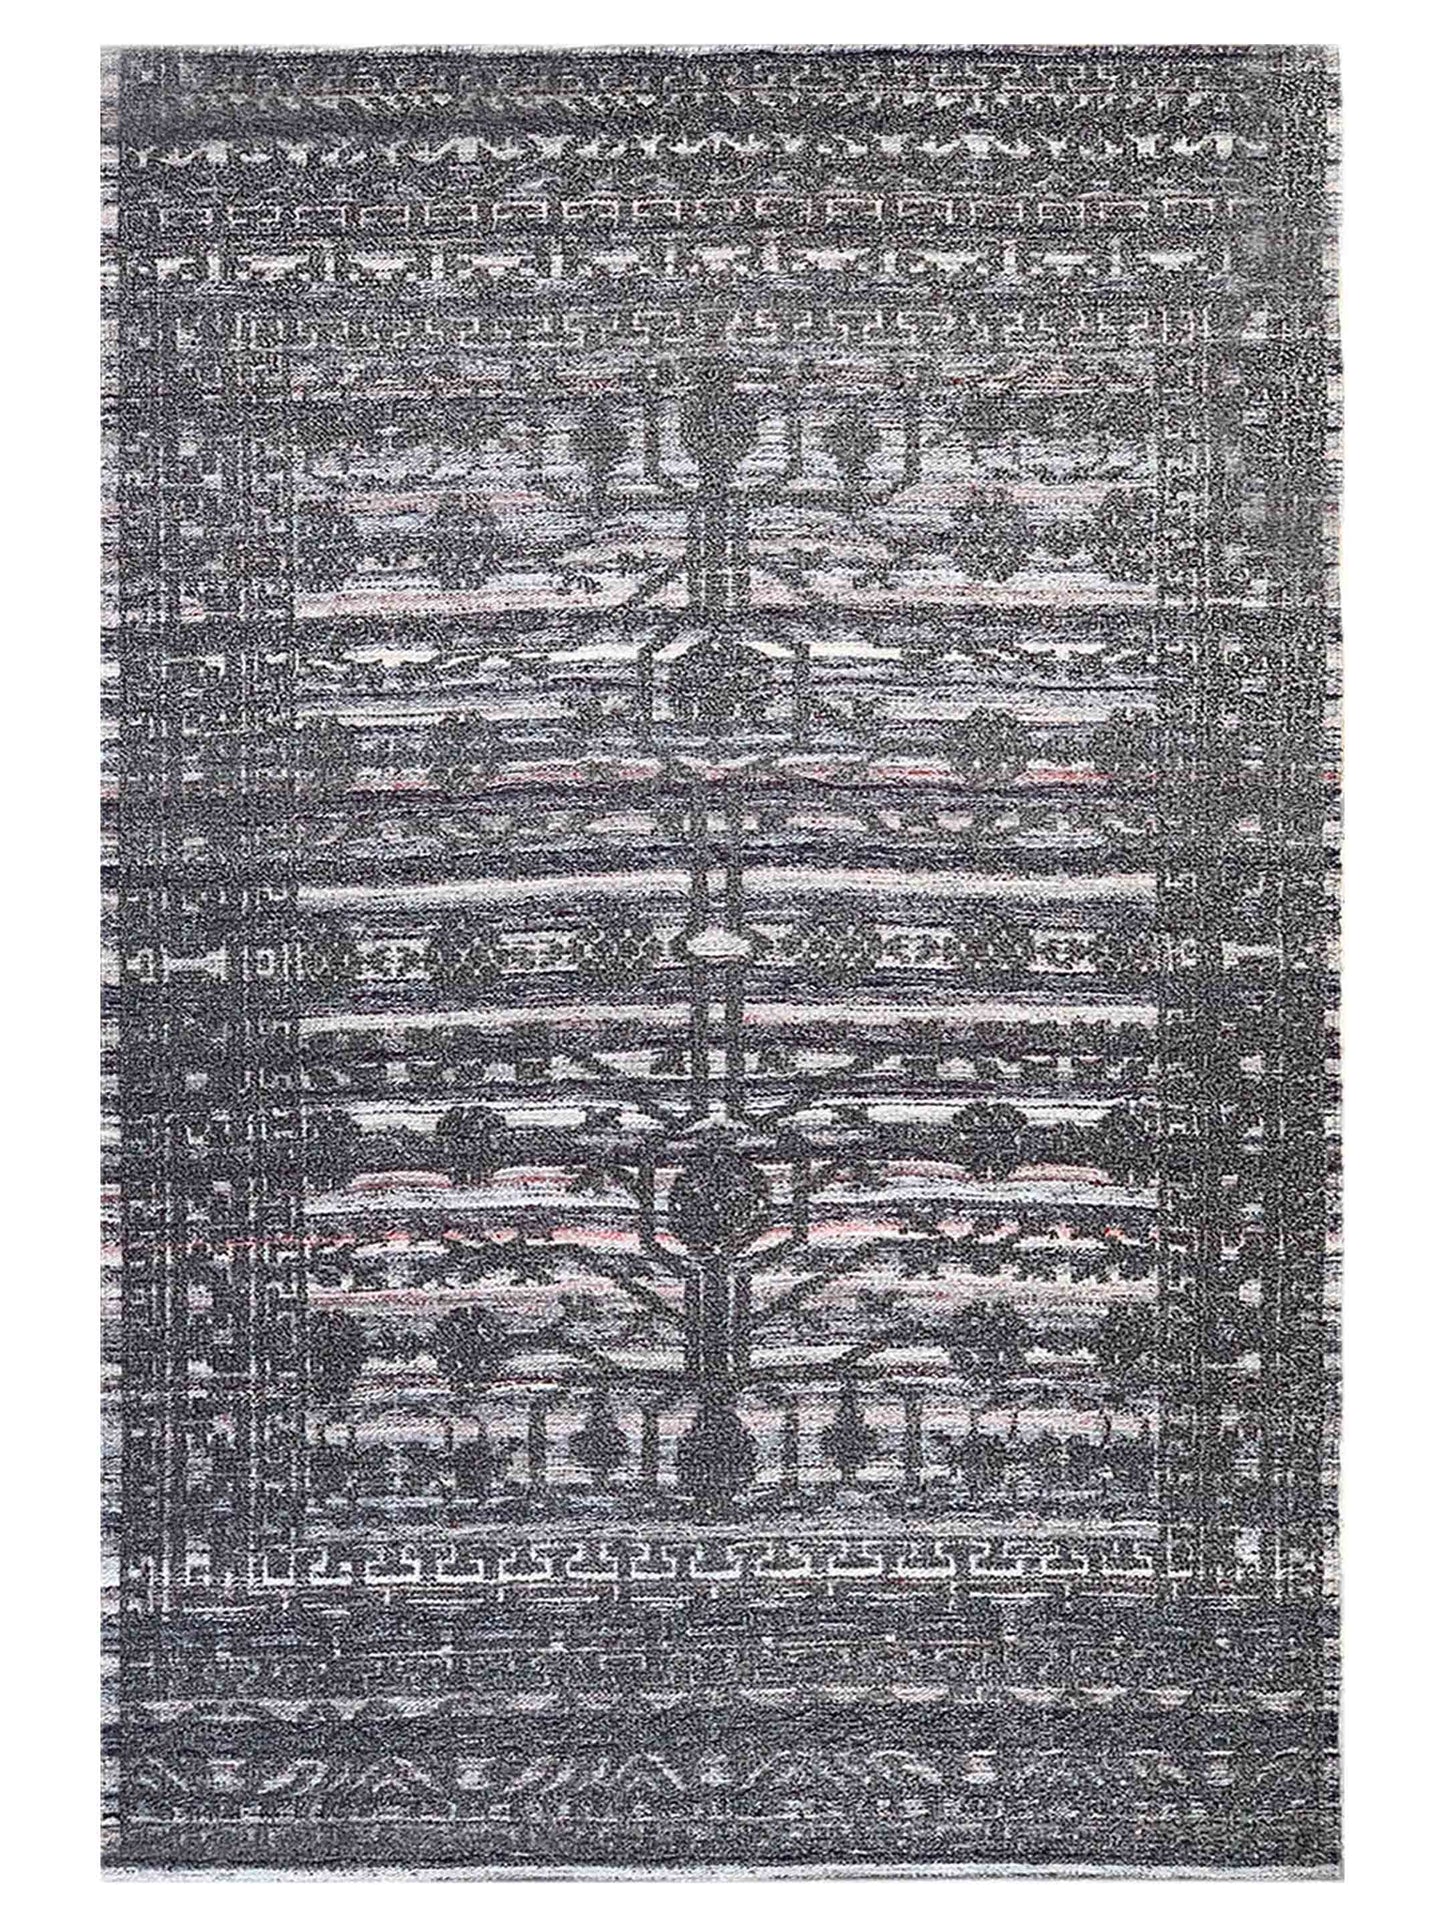 Artisan Odessa IO-8 BlueishGrey Transitional Knotted Rug